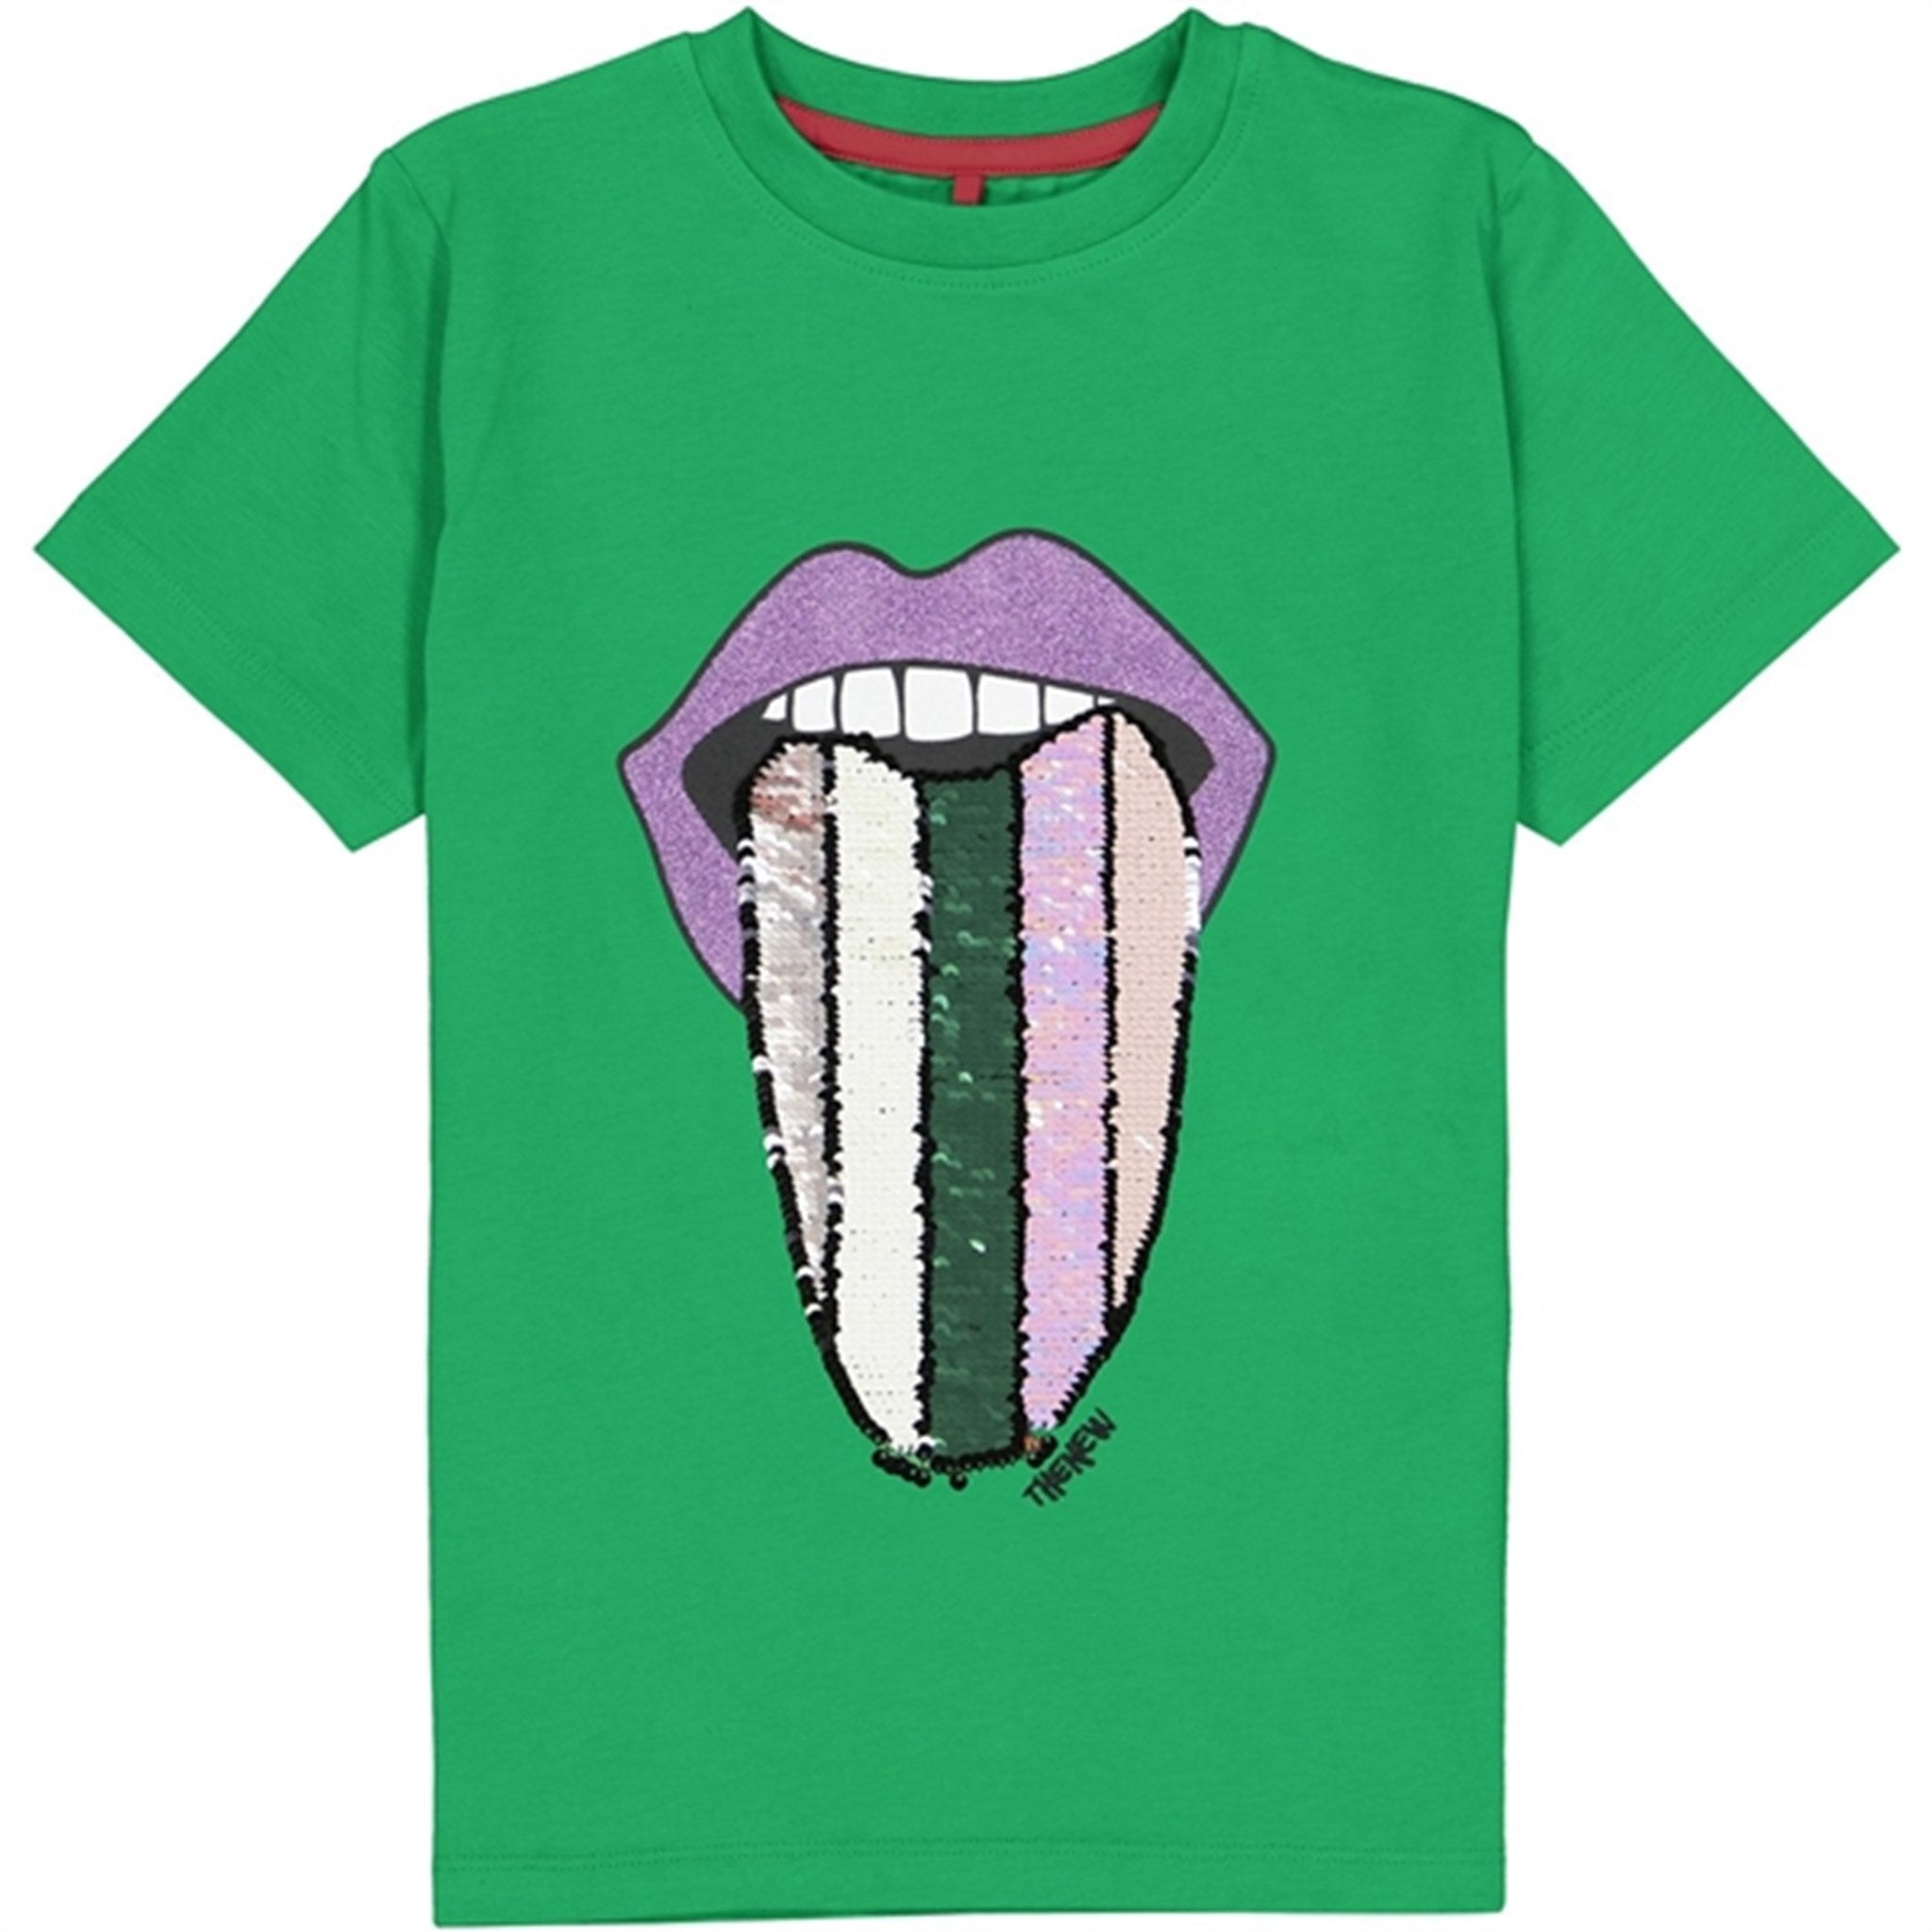 The New Bright Green Jennabell T-shirt 2